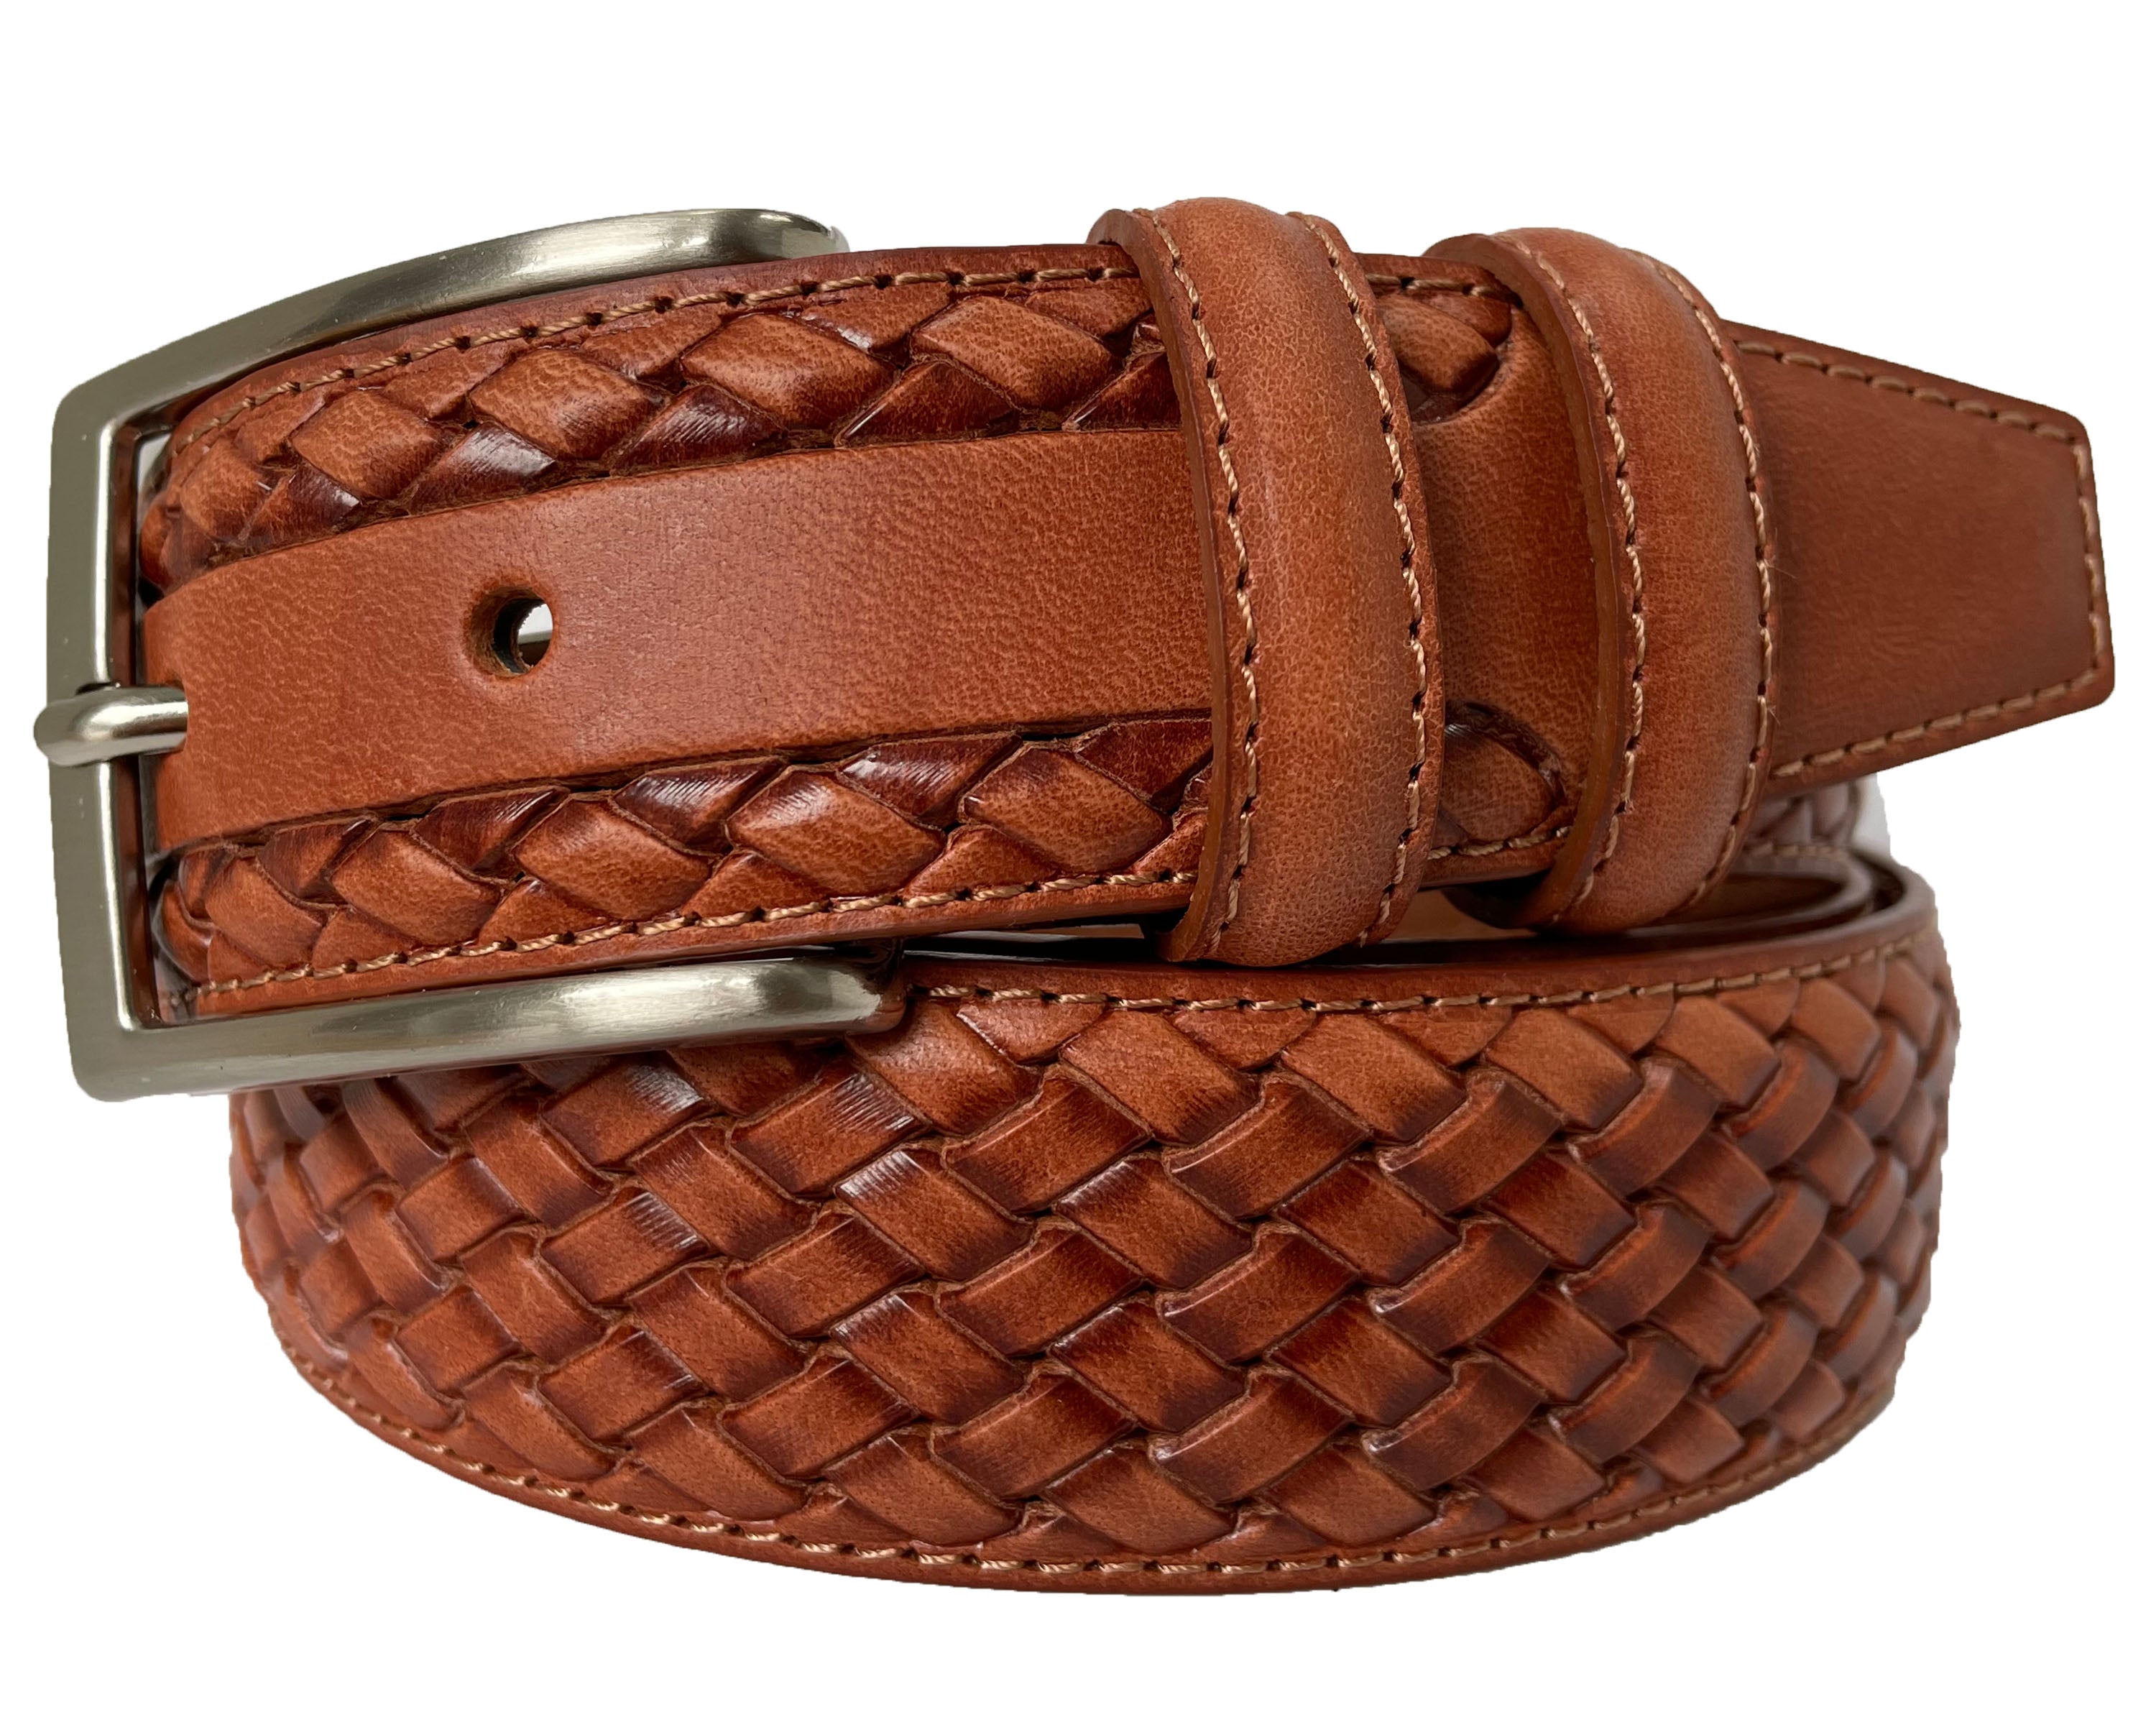 TWO TONE TAN CALF LEATHER BRAID WEAVE EMBOSSED 35MM LEATHER BELT